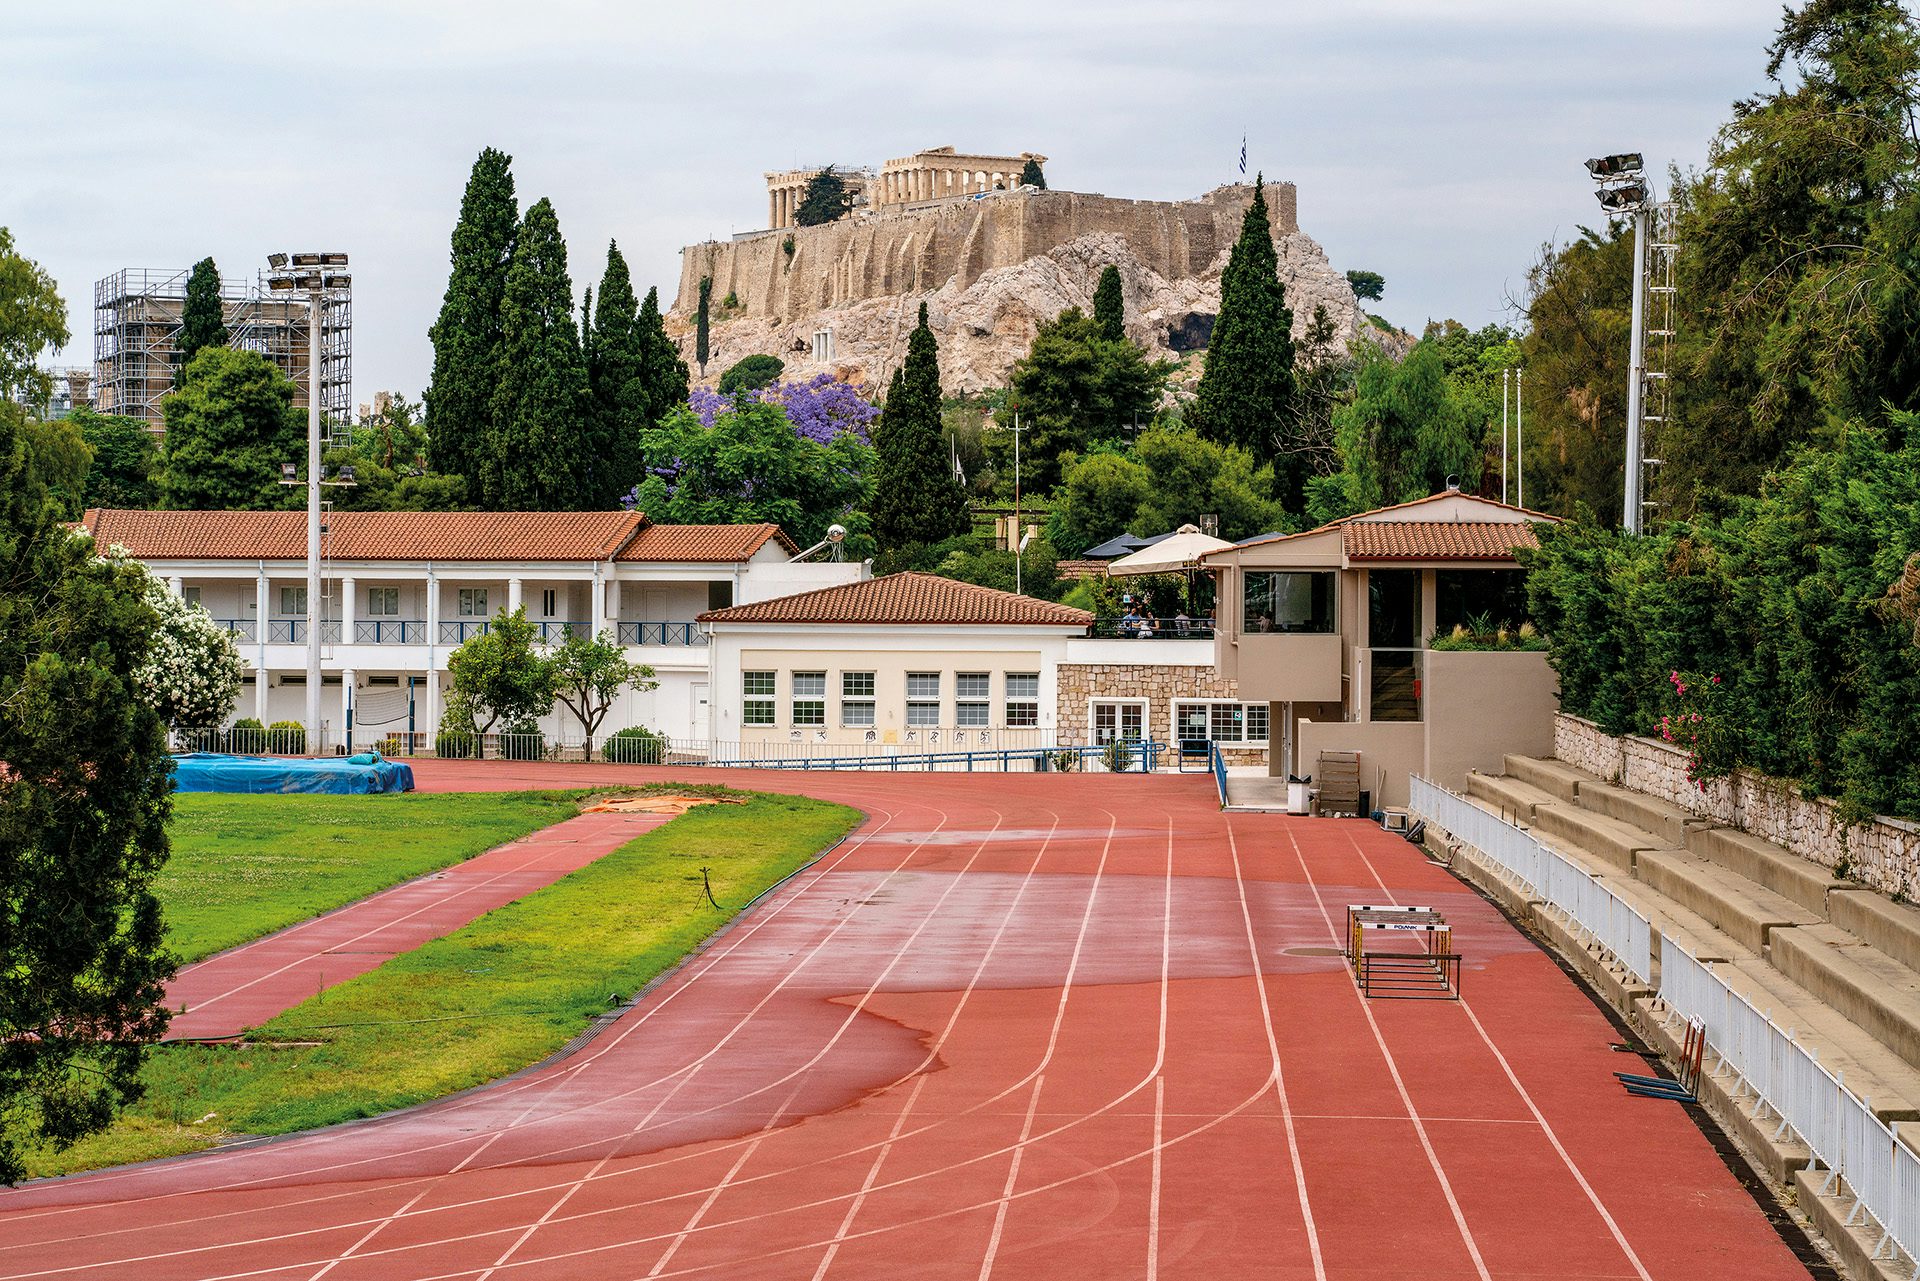 Image by Niko J. Kallianiotis shows a running track overlooked by the Acropolis in Athens